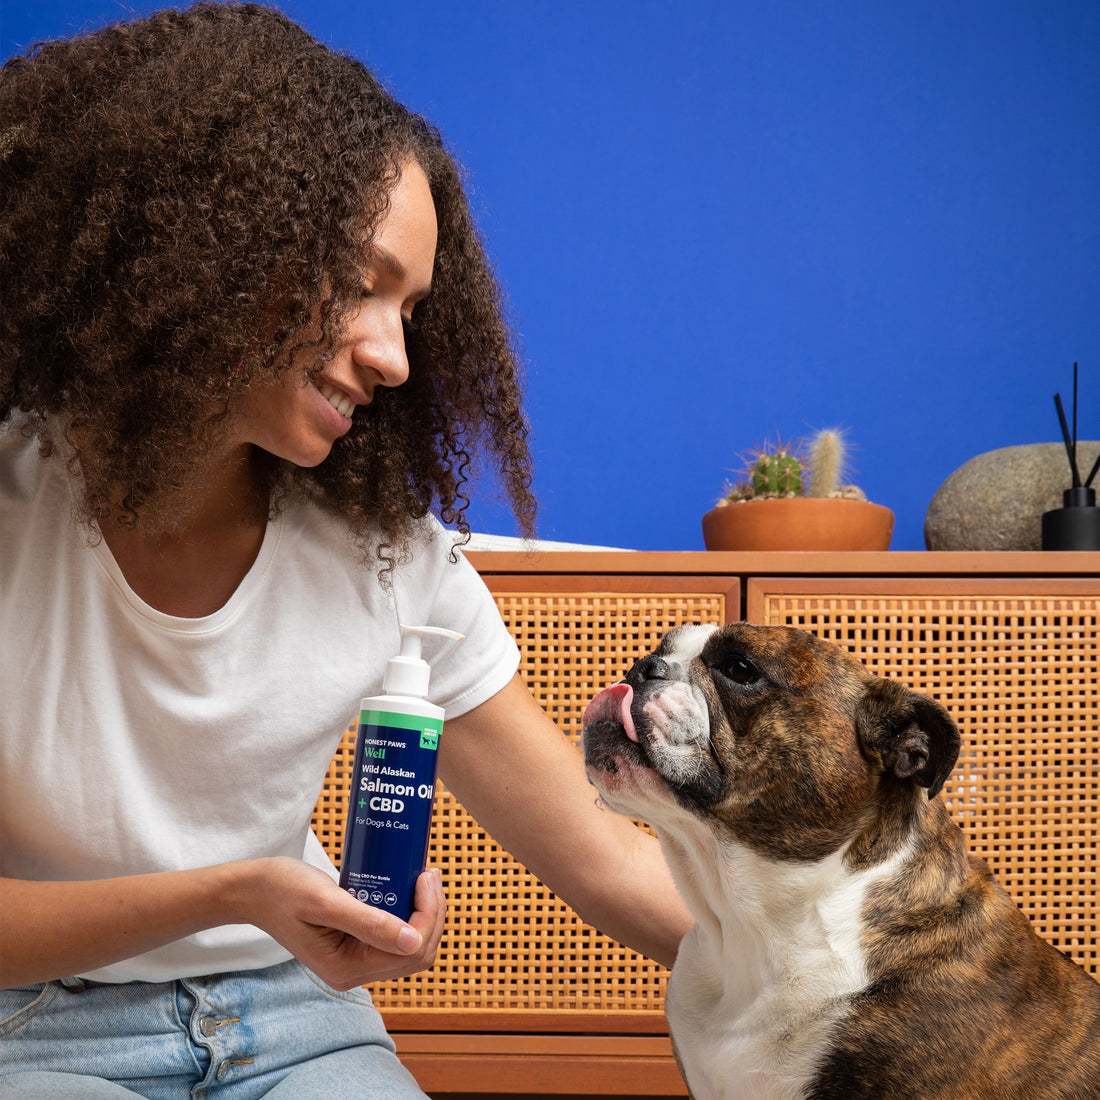 woman with brown curly hair holding bottle of salmon oil with cbd while bulldog looks at her licking his lips